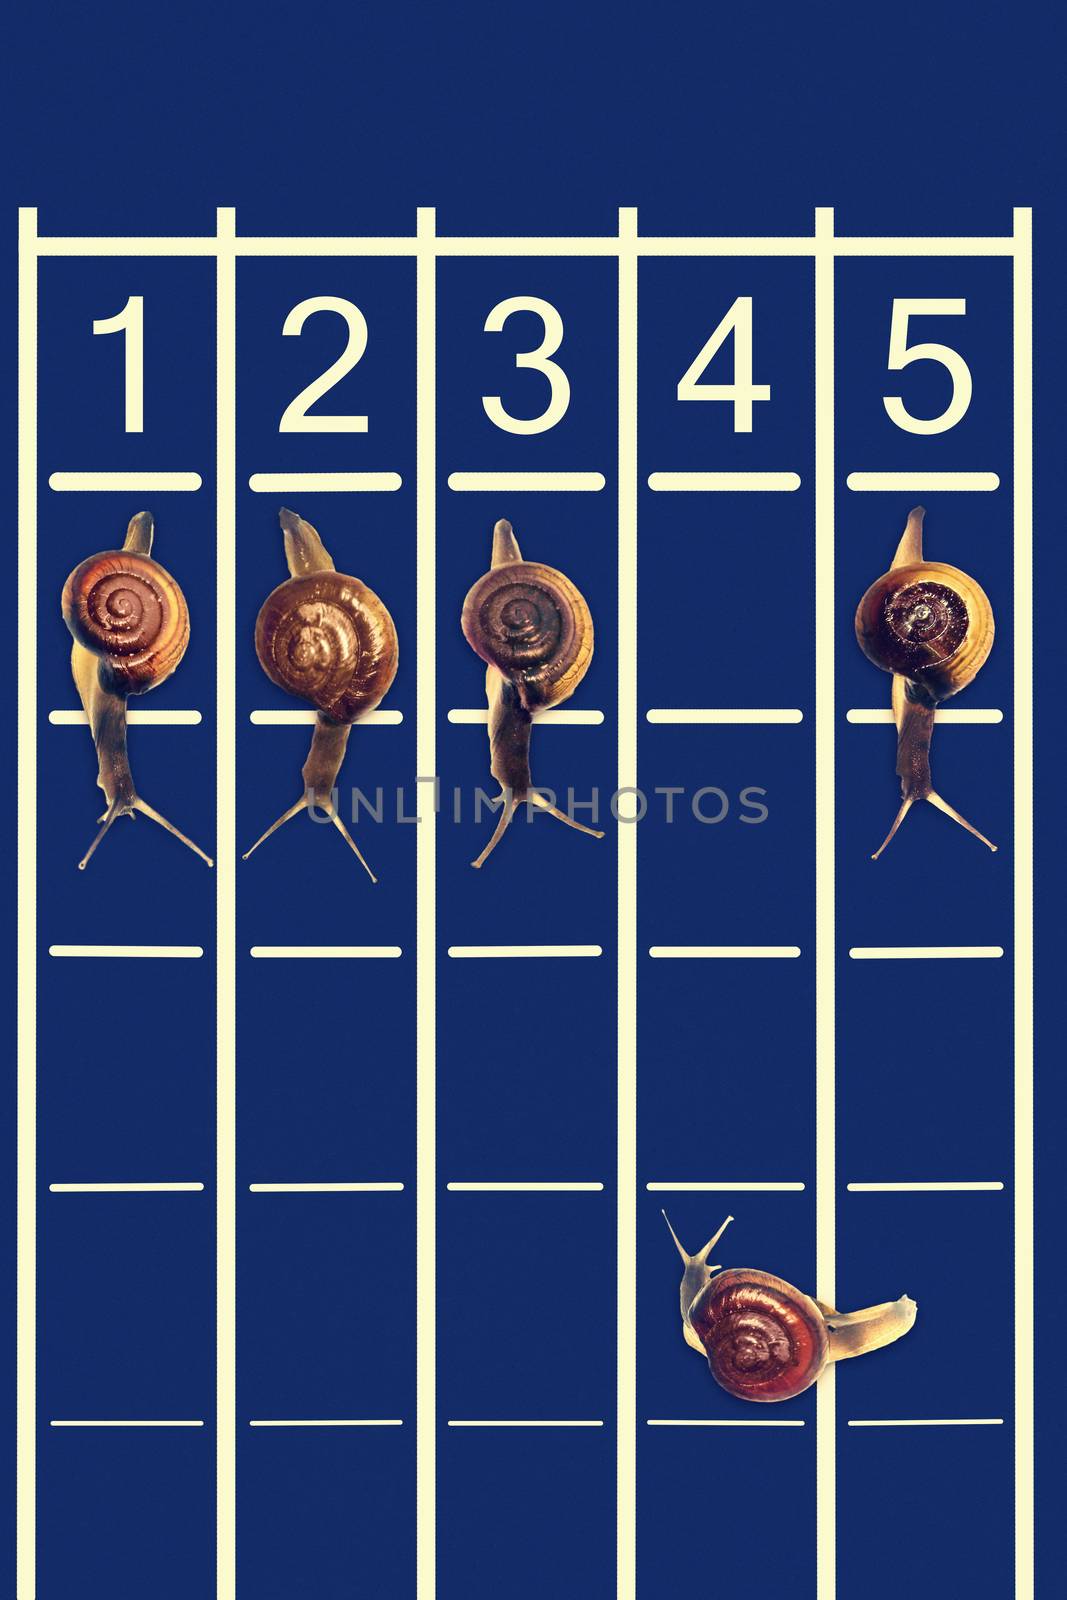 Snails running on track with one snail going backwords by yands